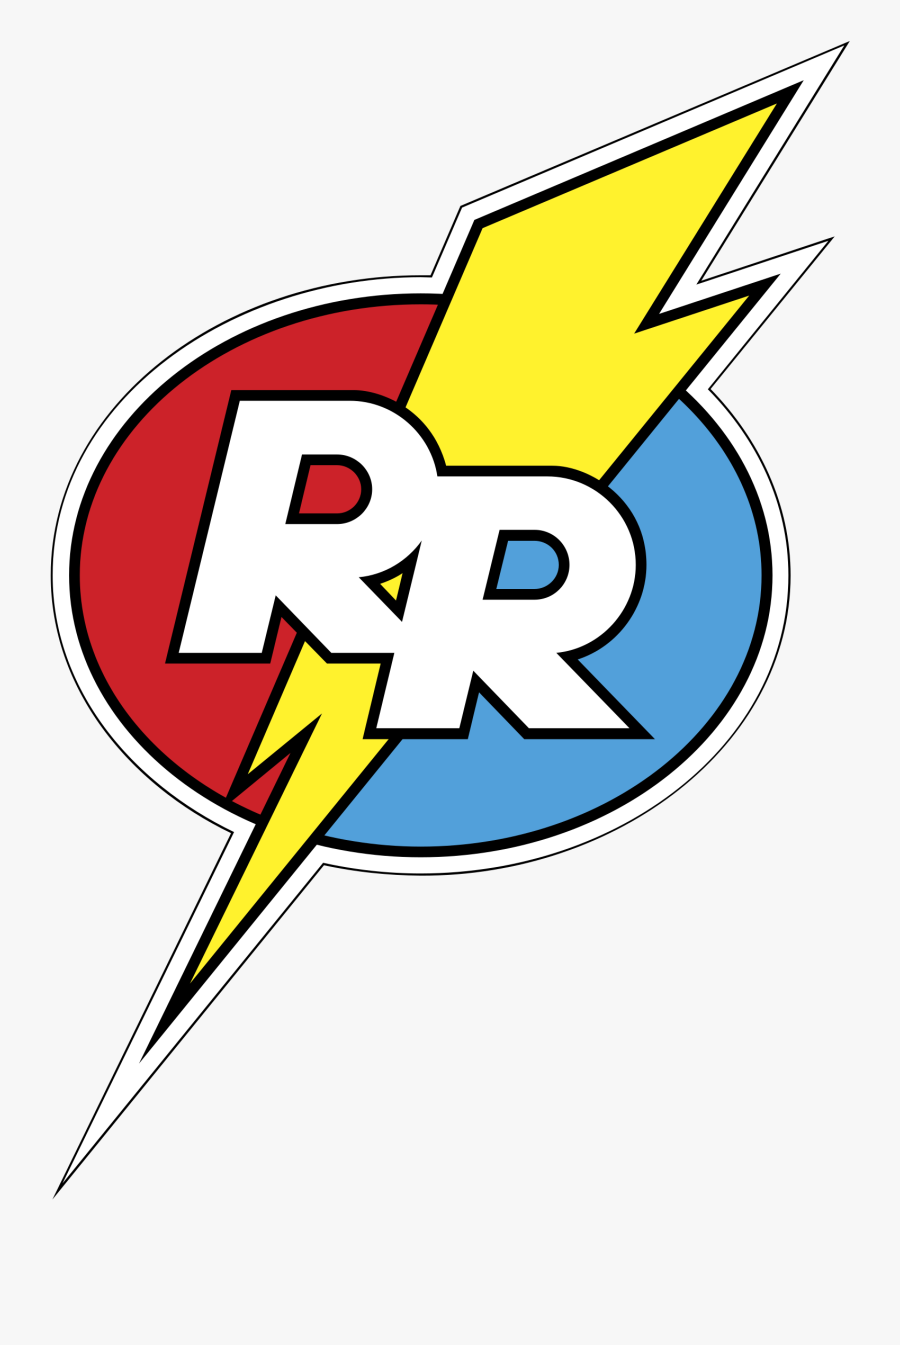 Chip"n Dale Rescue Rangers Logo Png Transparent - Chip N Dale Rescue Rangers Logo, Transparent Clipart